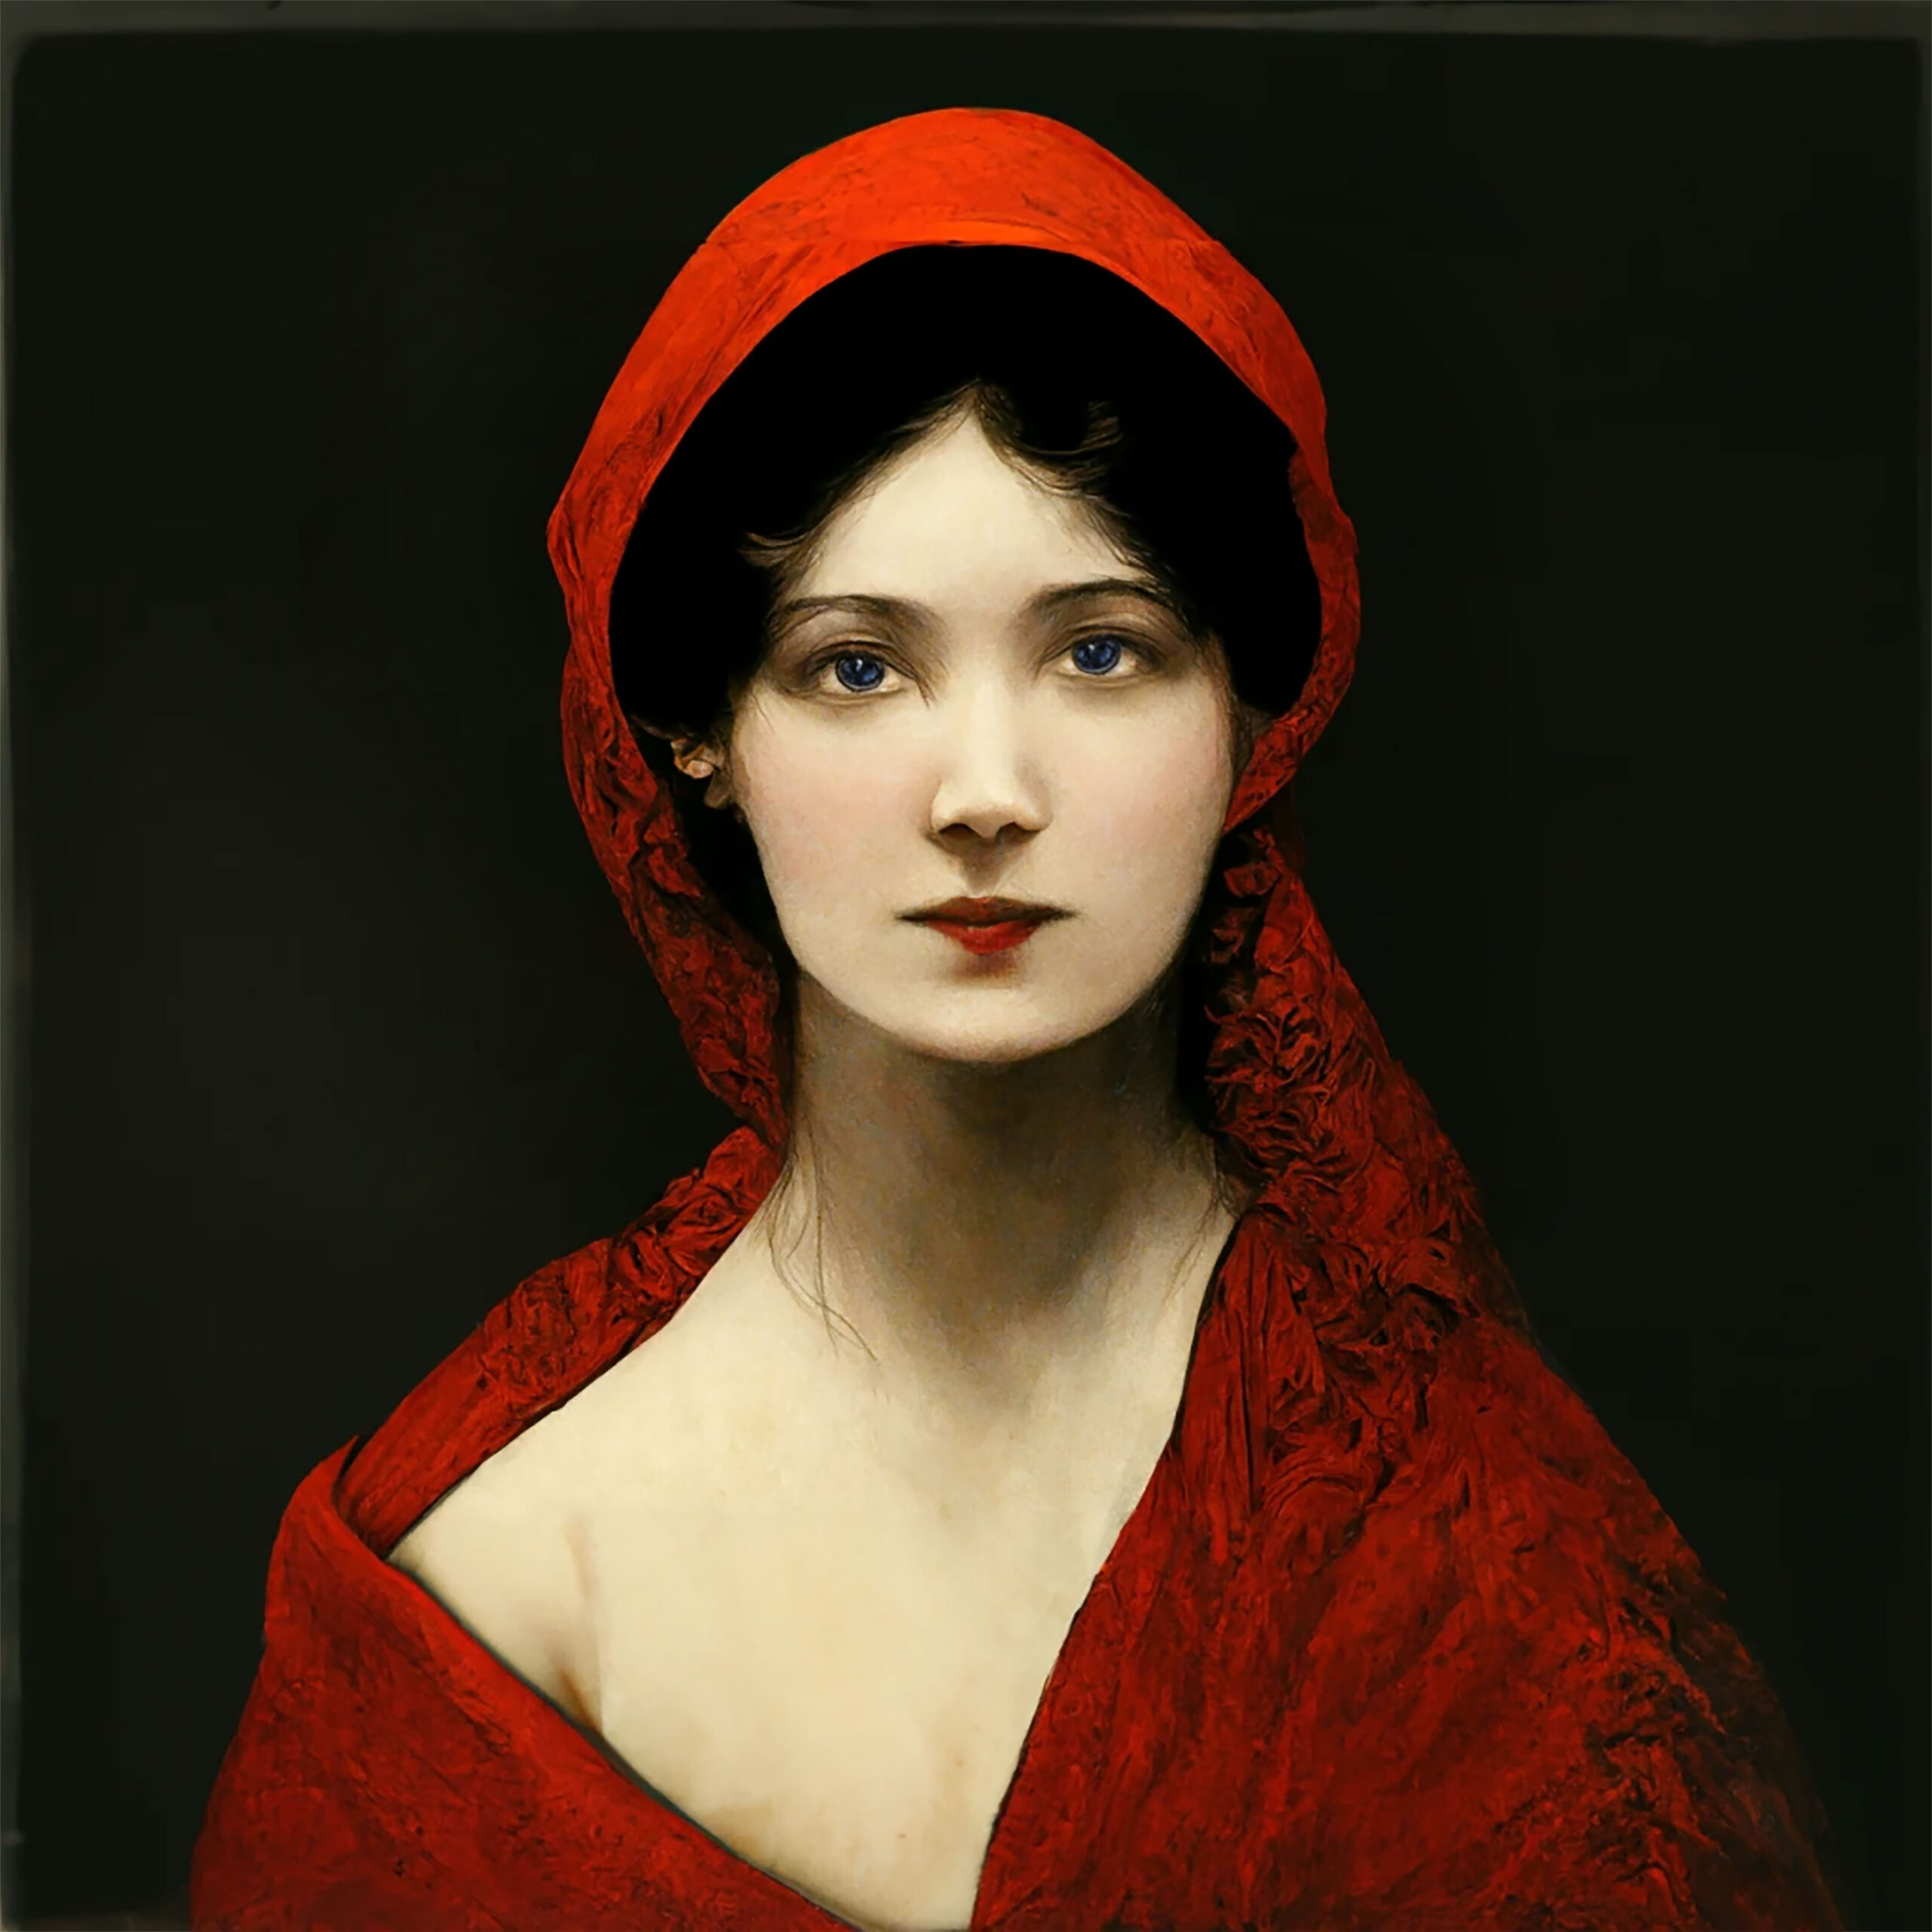 A digital painting of a woman's face with rosy skin, dark hair and a red veil covering the top of her head and right shoulder, against a black background. Her left shoulder is almost bare. The woman faces the viewer, she has blue eyes and a serene yet intense expression. The image features vibrant colours, with warm shades of pink, deep black, and intense red dominating the overall color scheme.